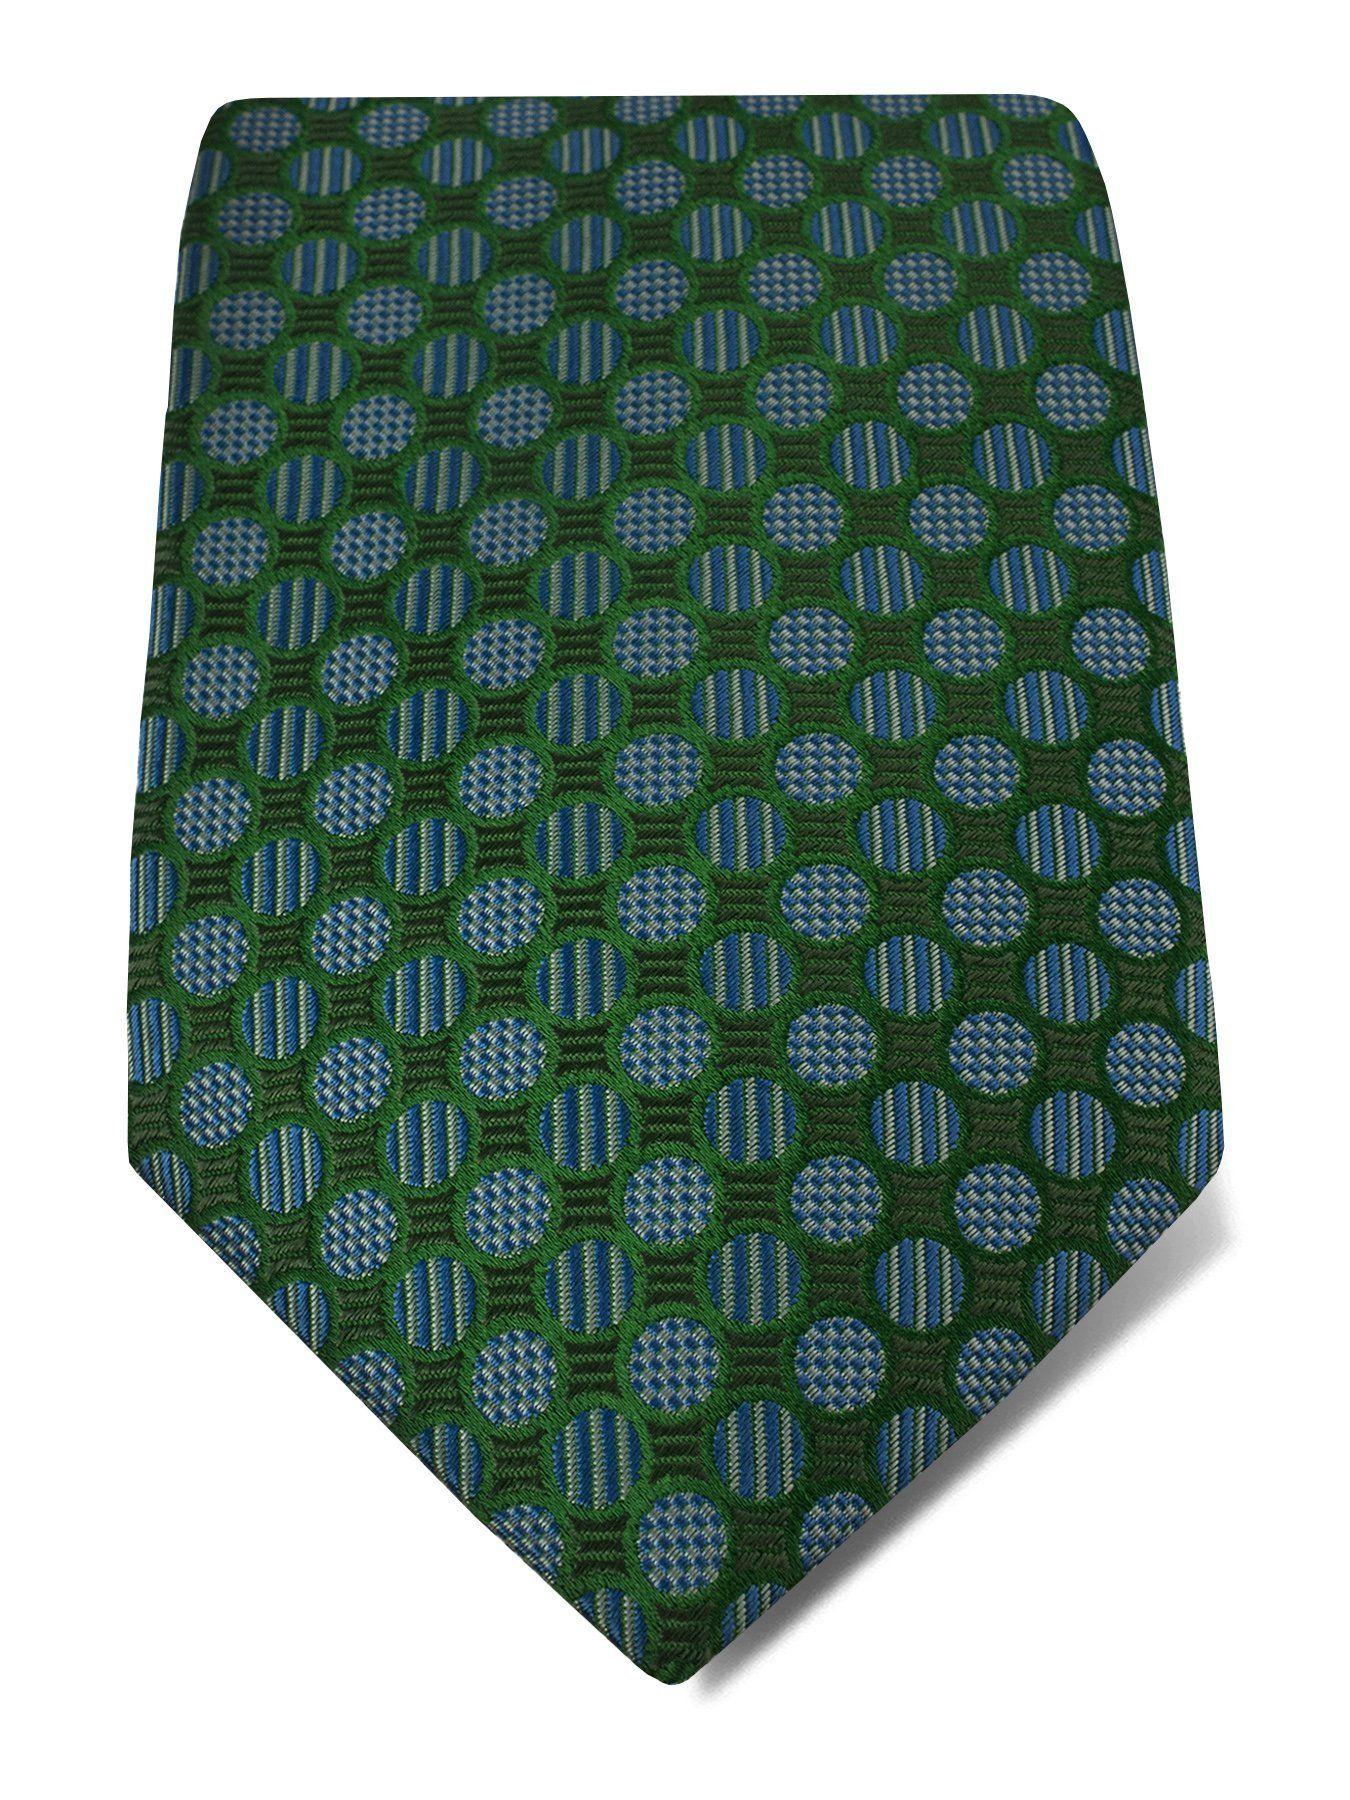 Green Rectangle With White Circles Logo - Green Woven Silk Tie with Blue & White Circles - Hilditch & Key